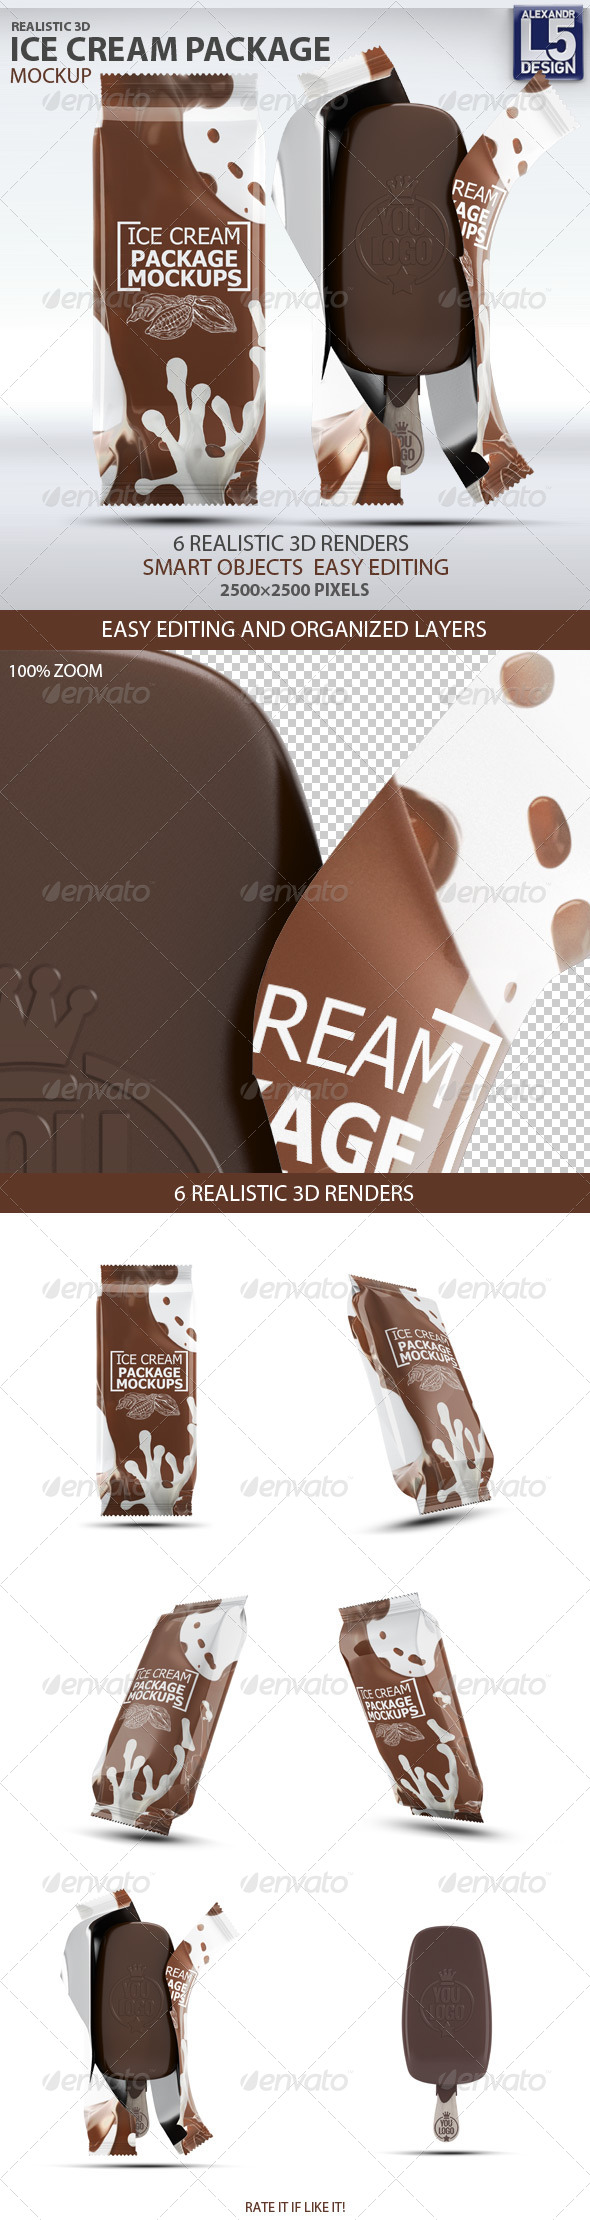 Ice Cream Package Mock Up By L5design Graphicriver